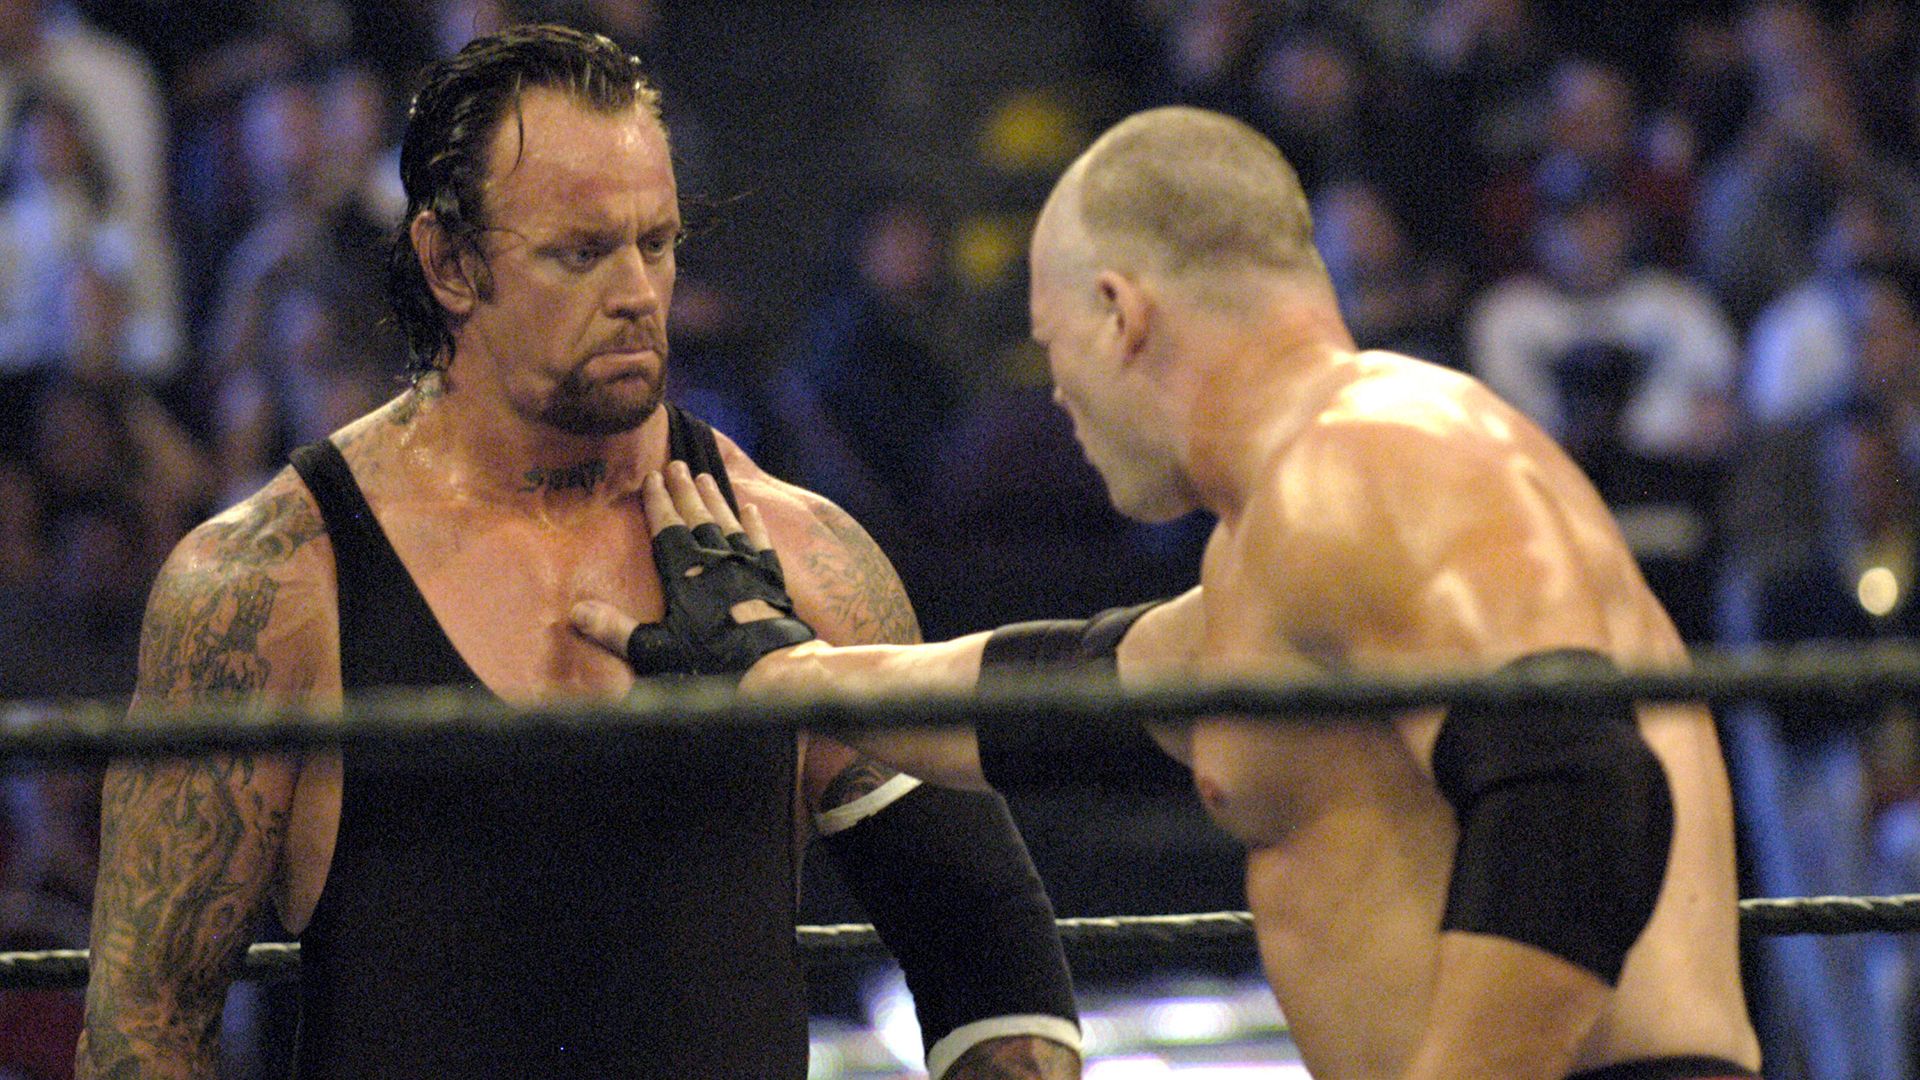 The Undertaker's Mount Rushmore of WWE 'small wrestlers'